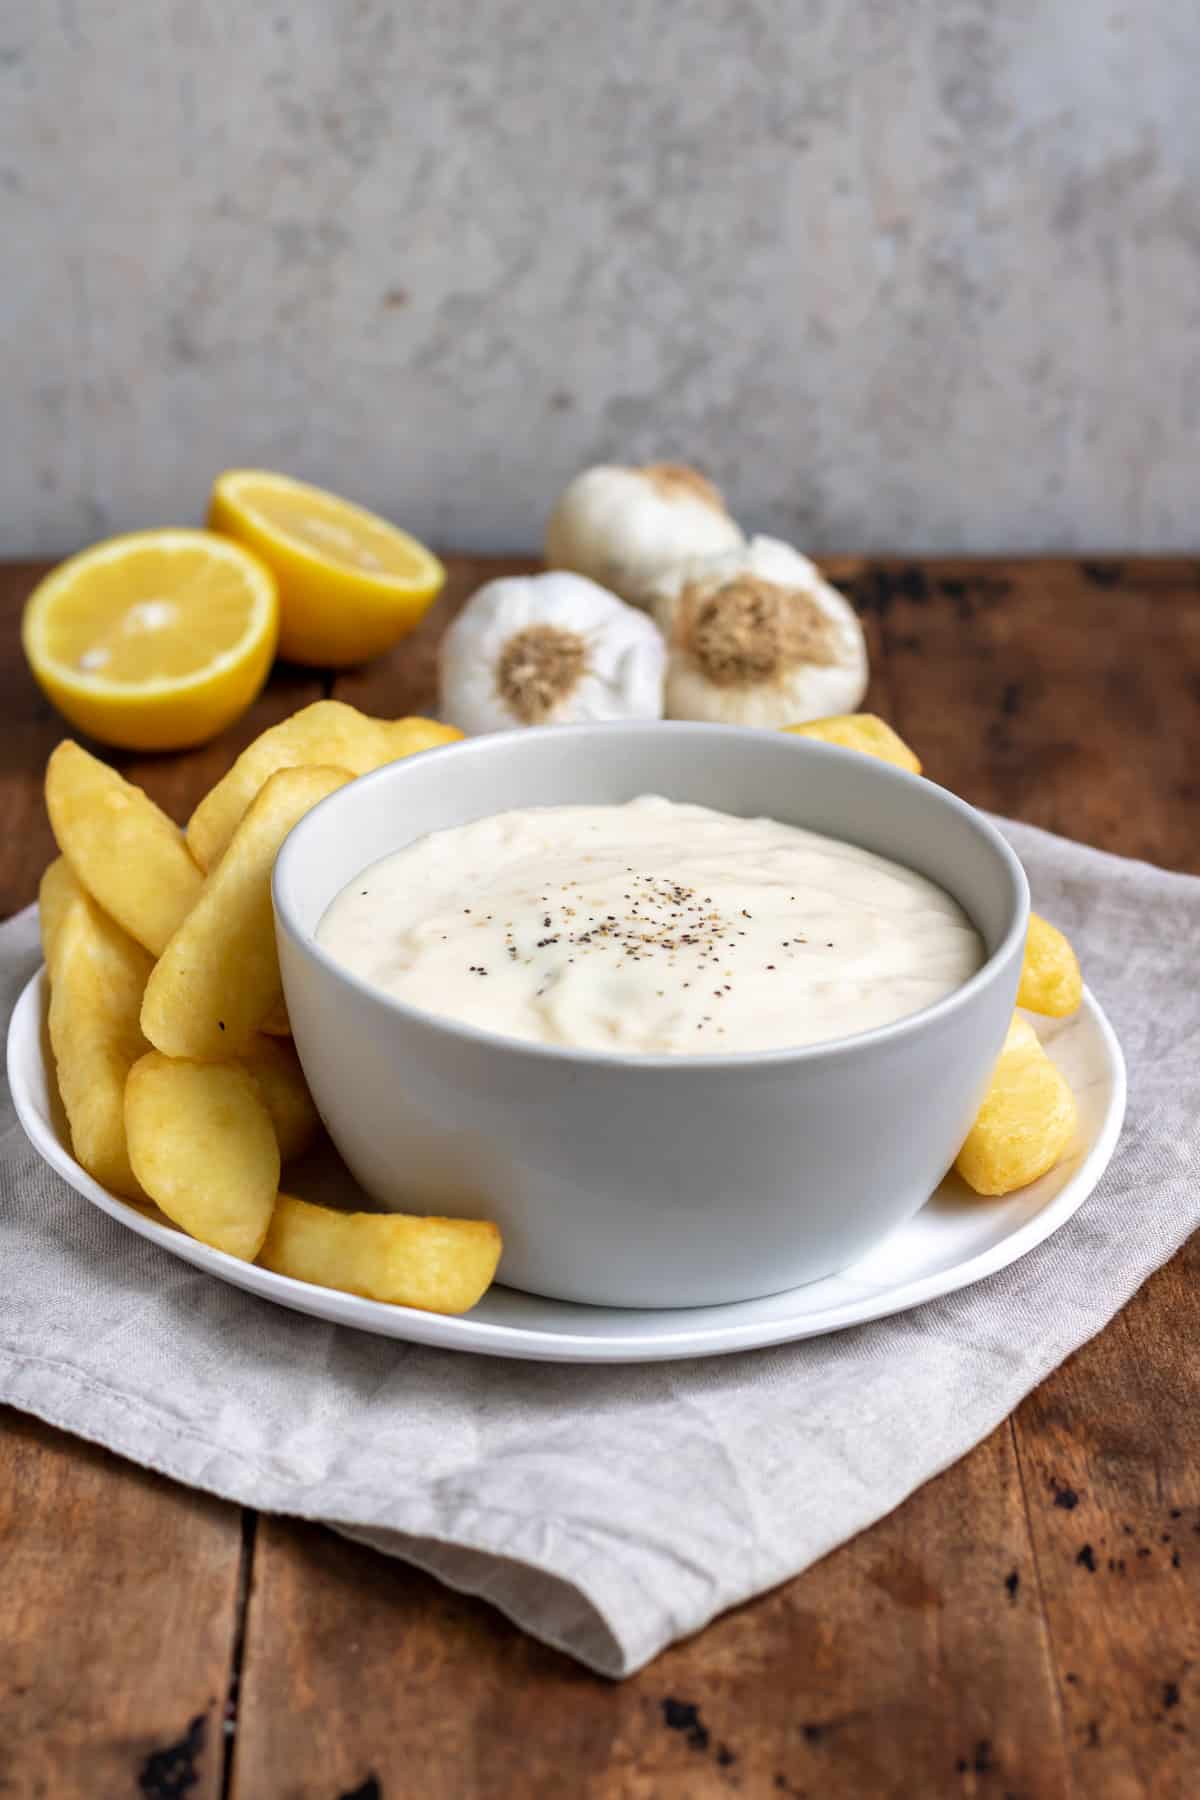 Table with a plate of fries, bowl of horseradish aioli, slices of lemon and cloves of garlic.